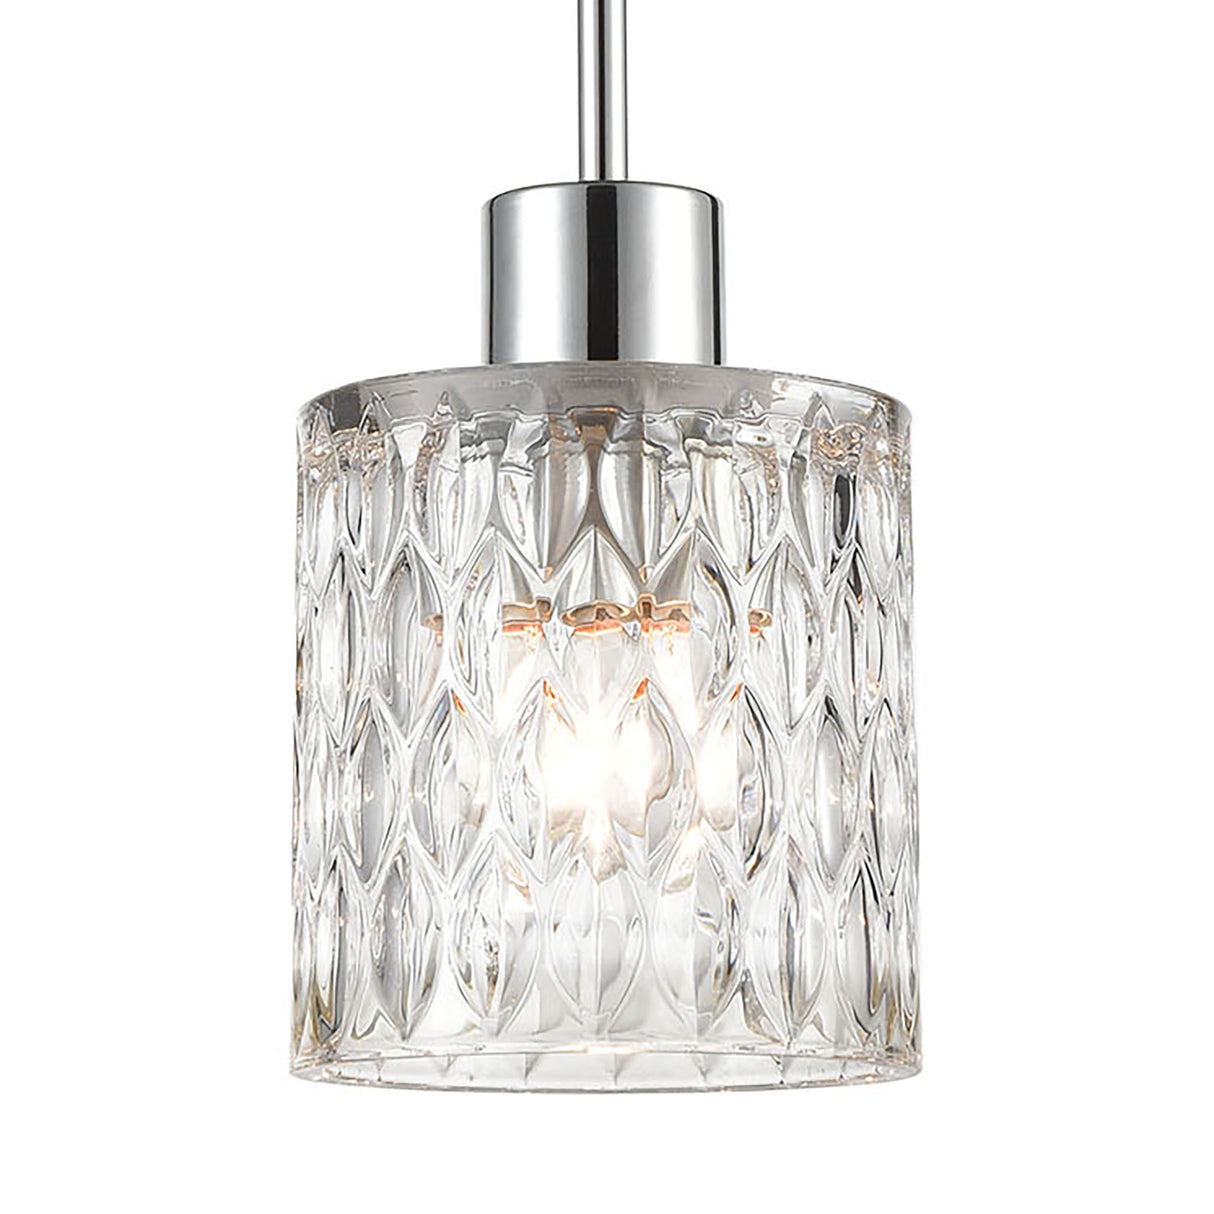 Elk 17424/1 Ezra 1-Light Mini Pendant in Polished Chrome with Textured Clear Crystal